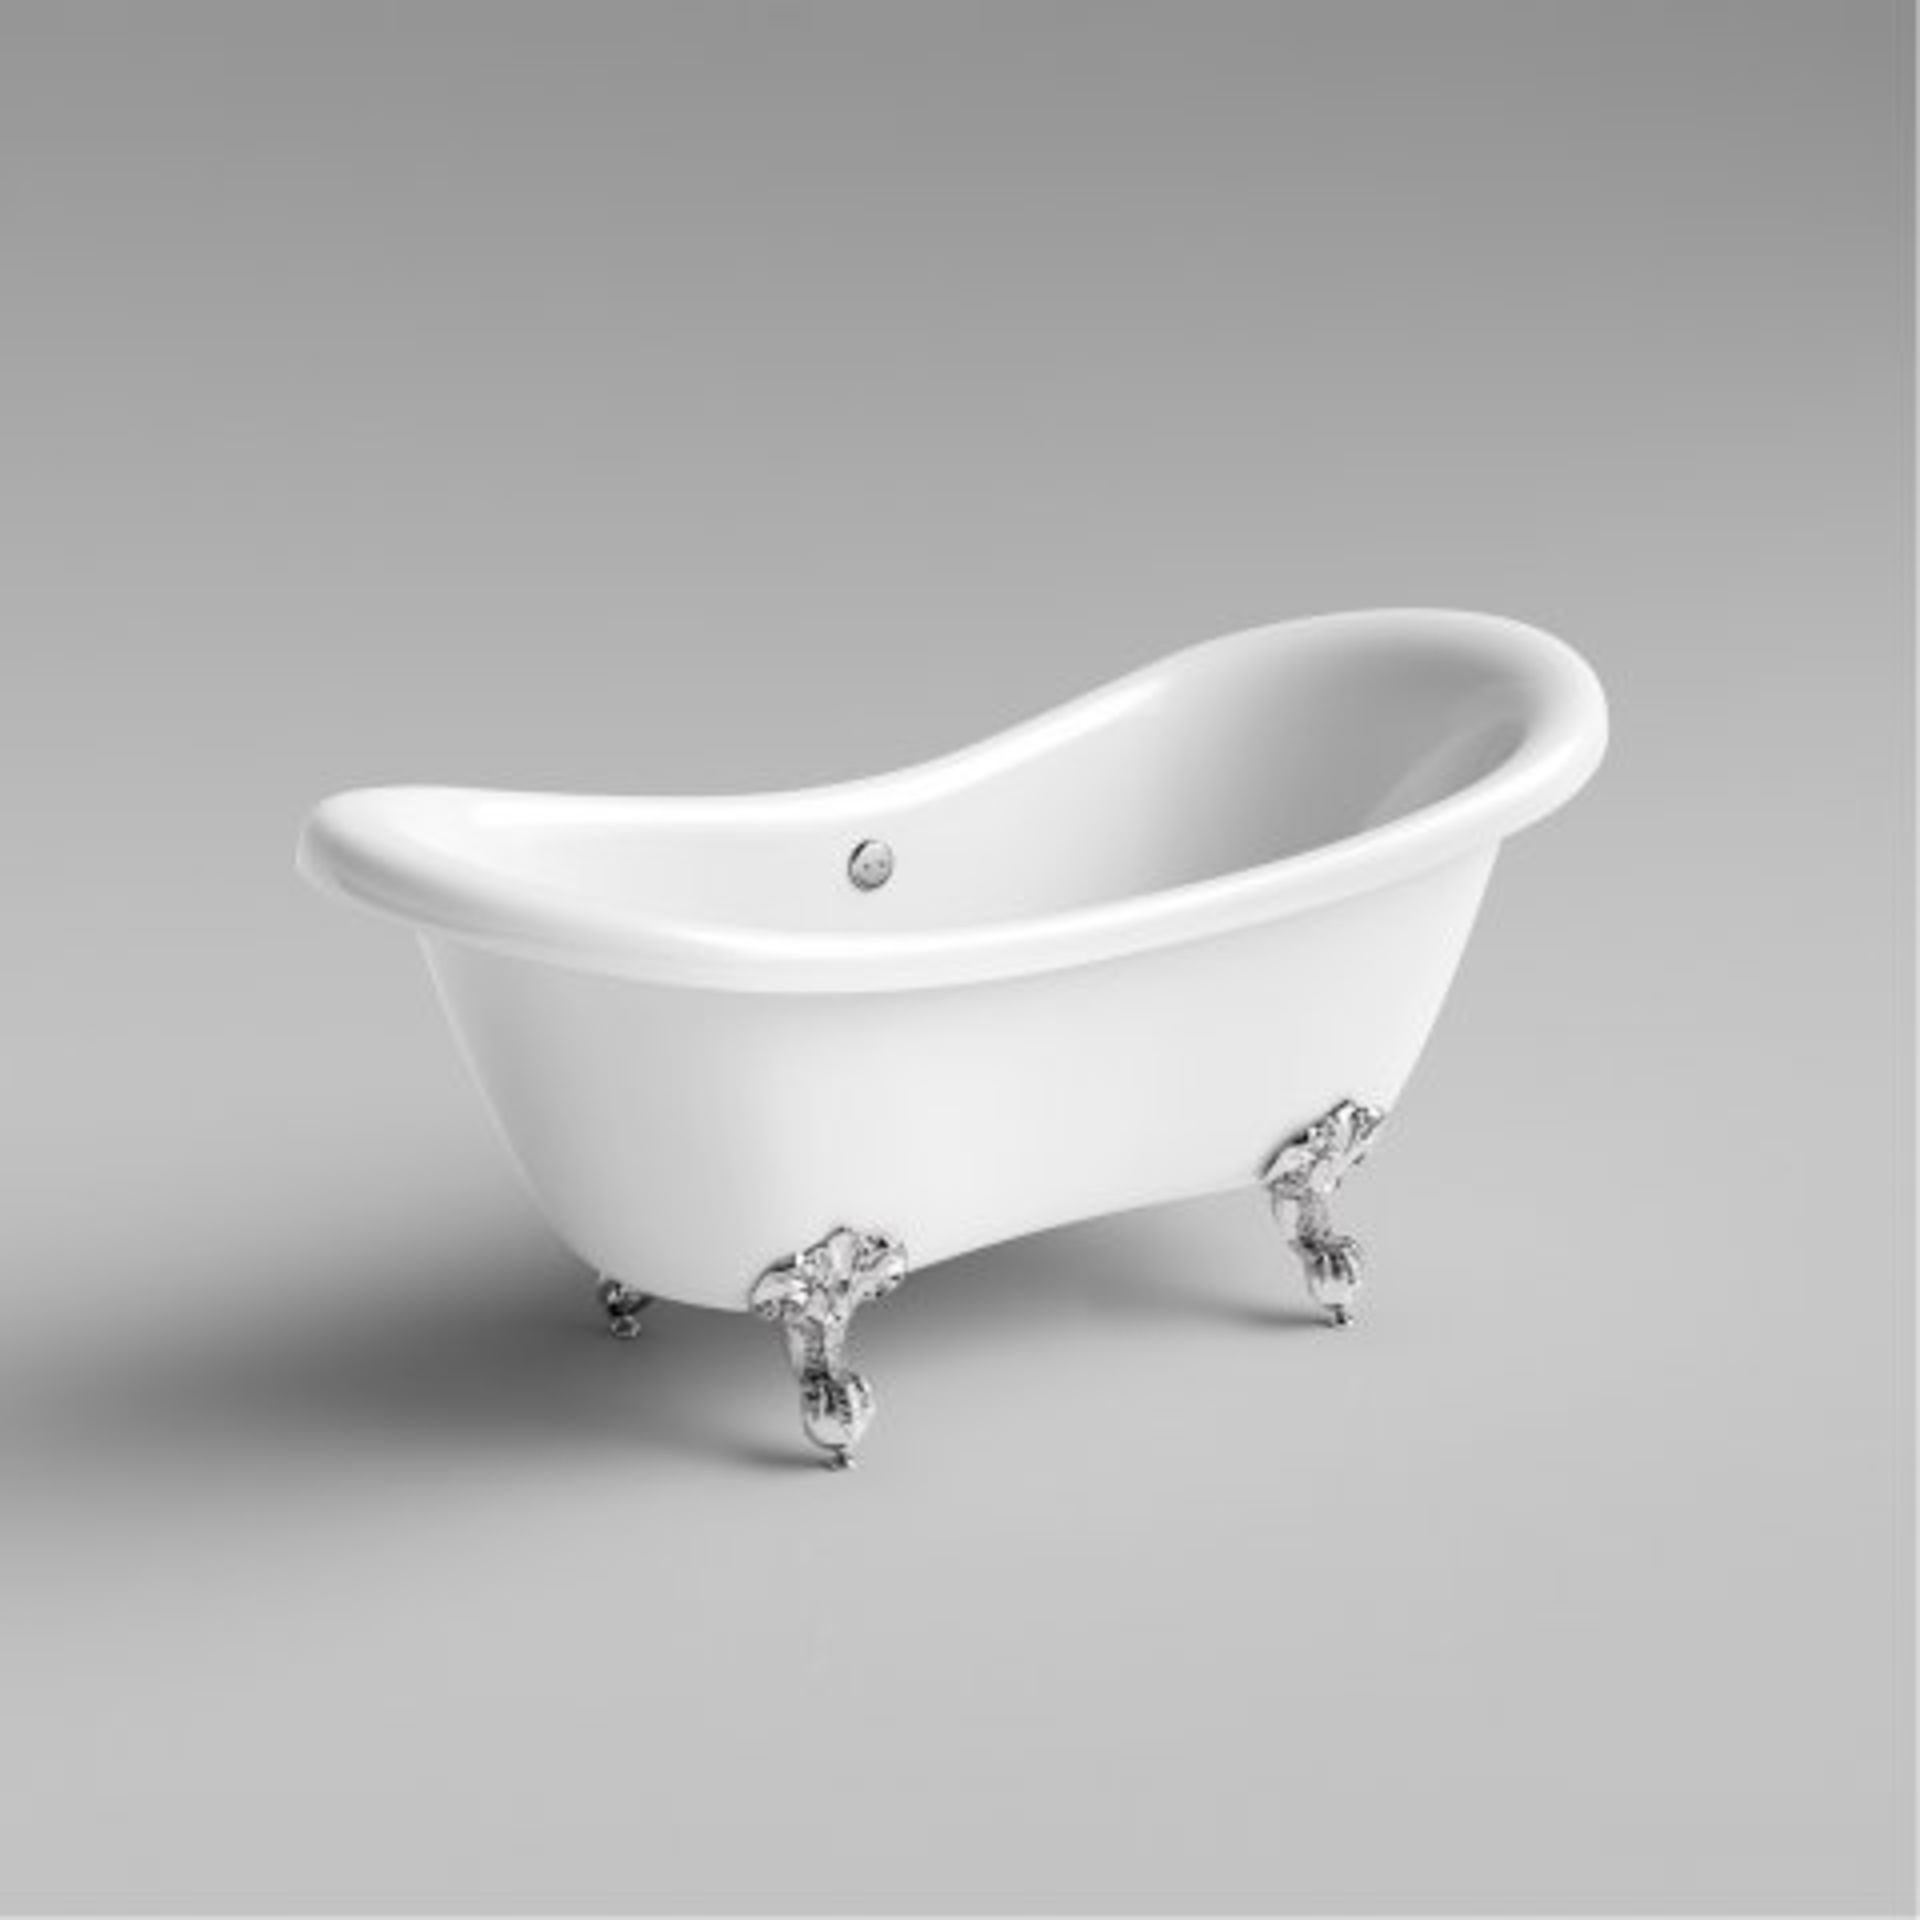 (I15) 1600mm Victoria Traditional Roll Top Double Slipper Bath - Ball Feet - Large. RRP £799.99. - Image 3 of 4